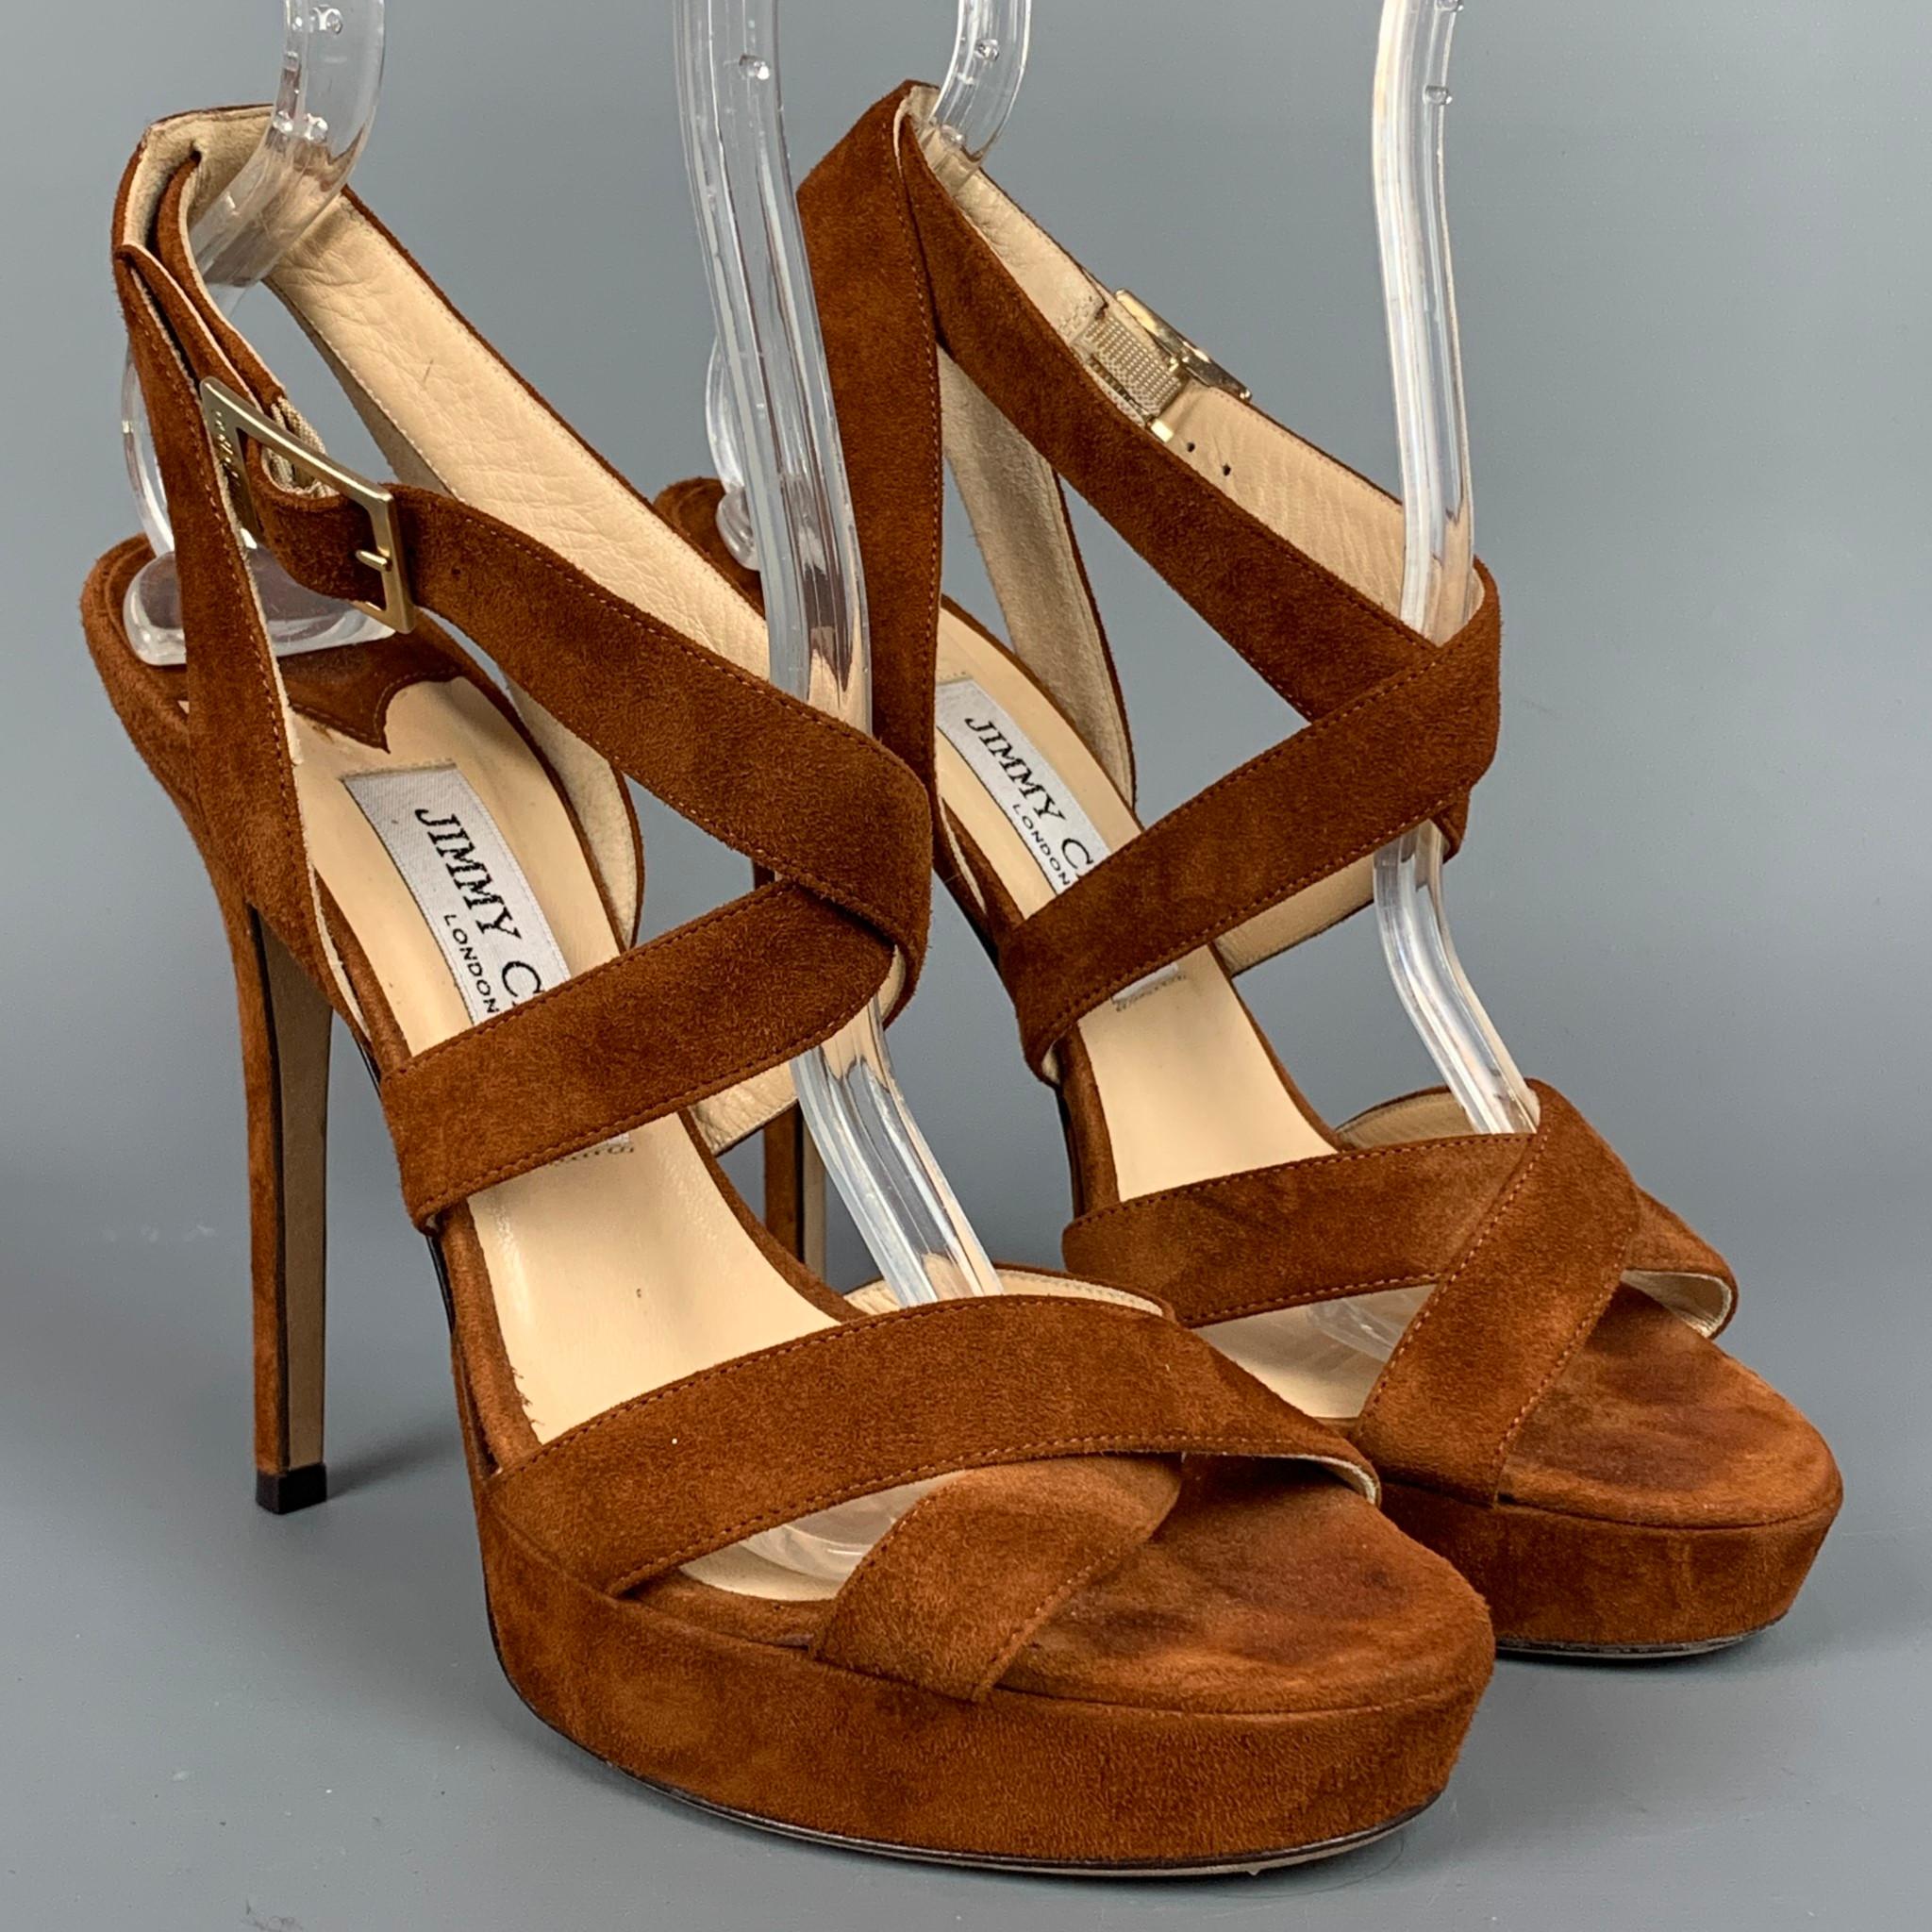 JIMMY CHOO sandals comes in a tan suede featuring a strappy style, platform, and a stiletto heel. Made in Italy.

Very Good Pre-Owned Condition.
Marked: IT 37

Measurements:

Heel: 5 in.
Platform: 0.5 in. 